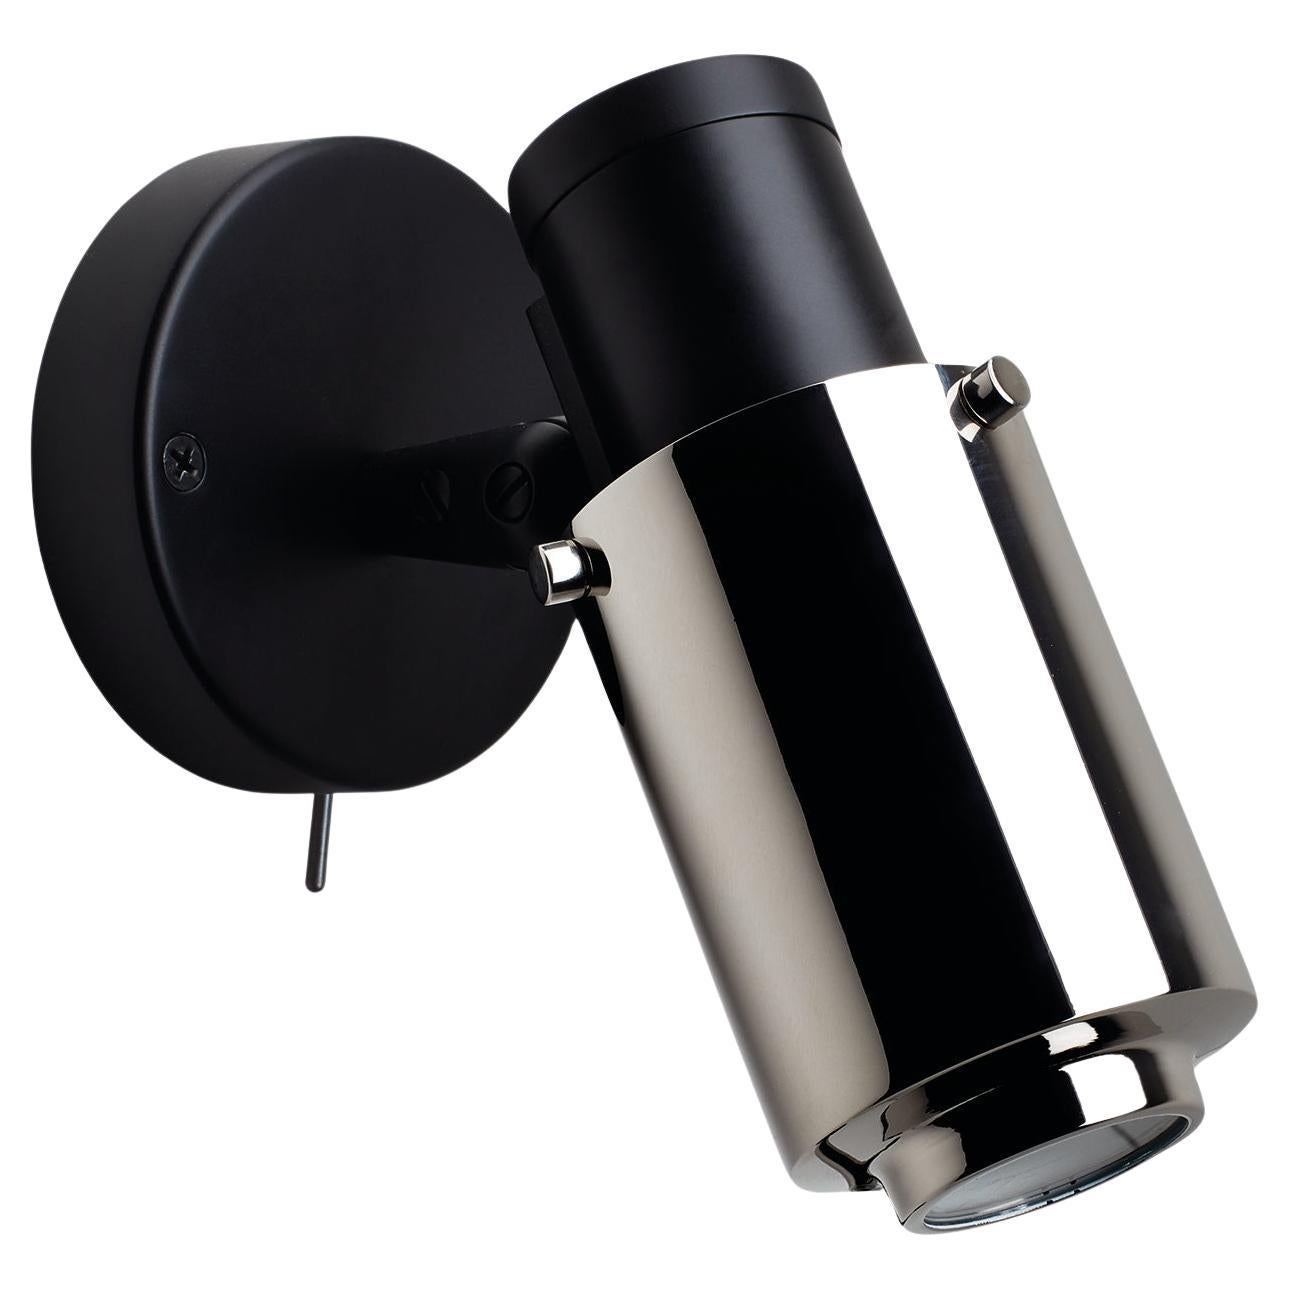 DCW Editions Biny Spot LED Wall Lamp in Black-Nickel Steel & Aluminium w/o Stick For Sale